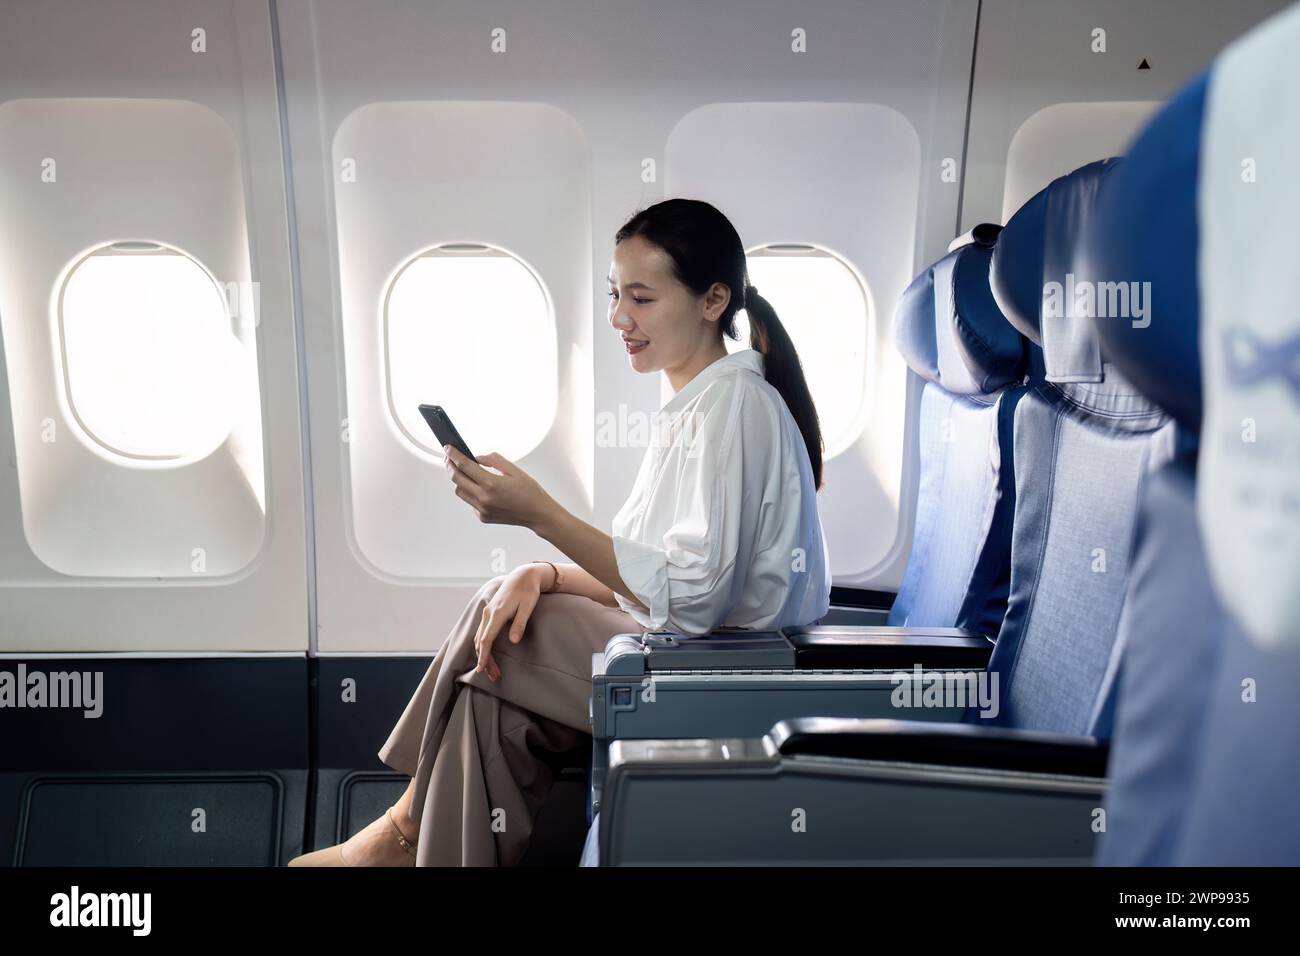 A woman is sitting on an airplane and looking at her phone Stock Photo